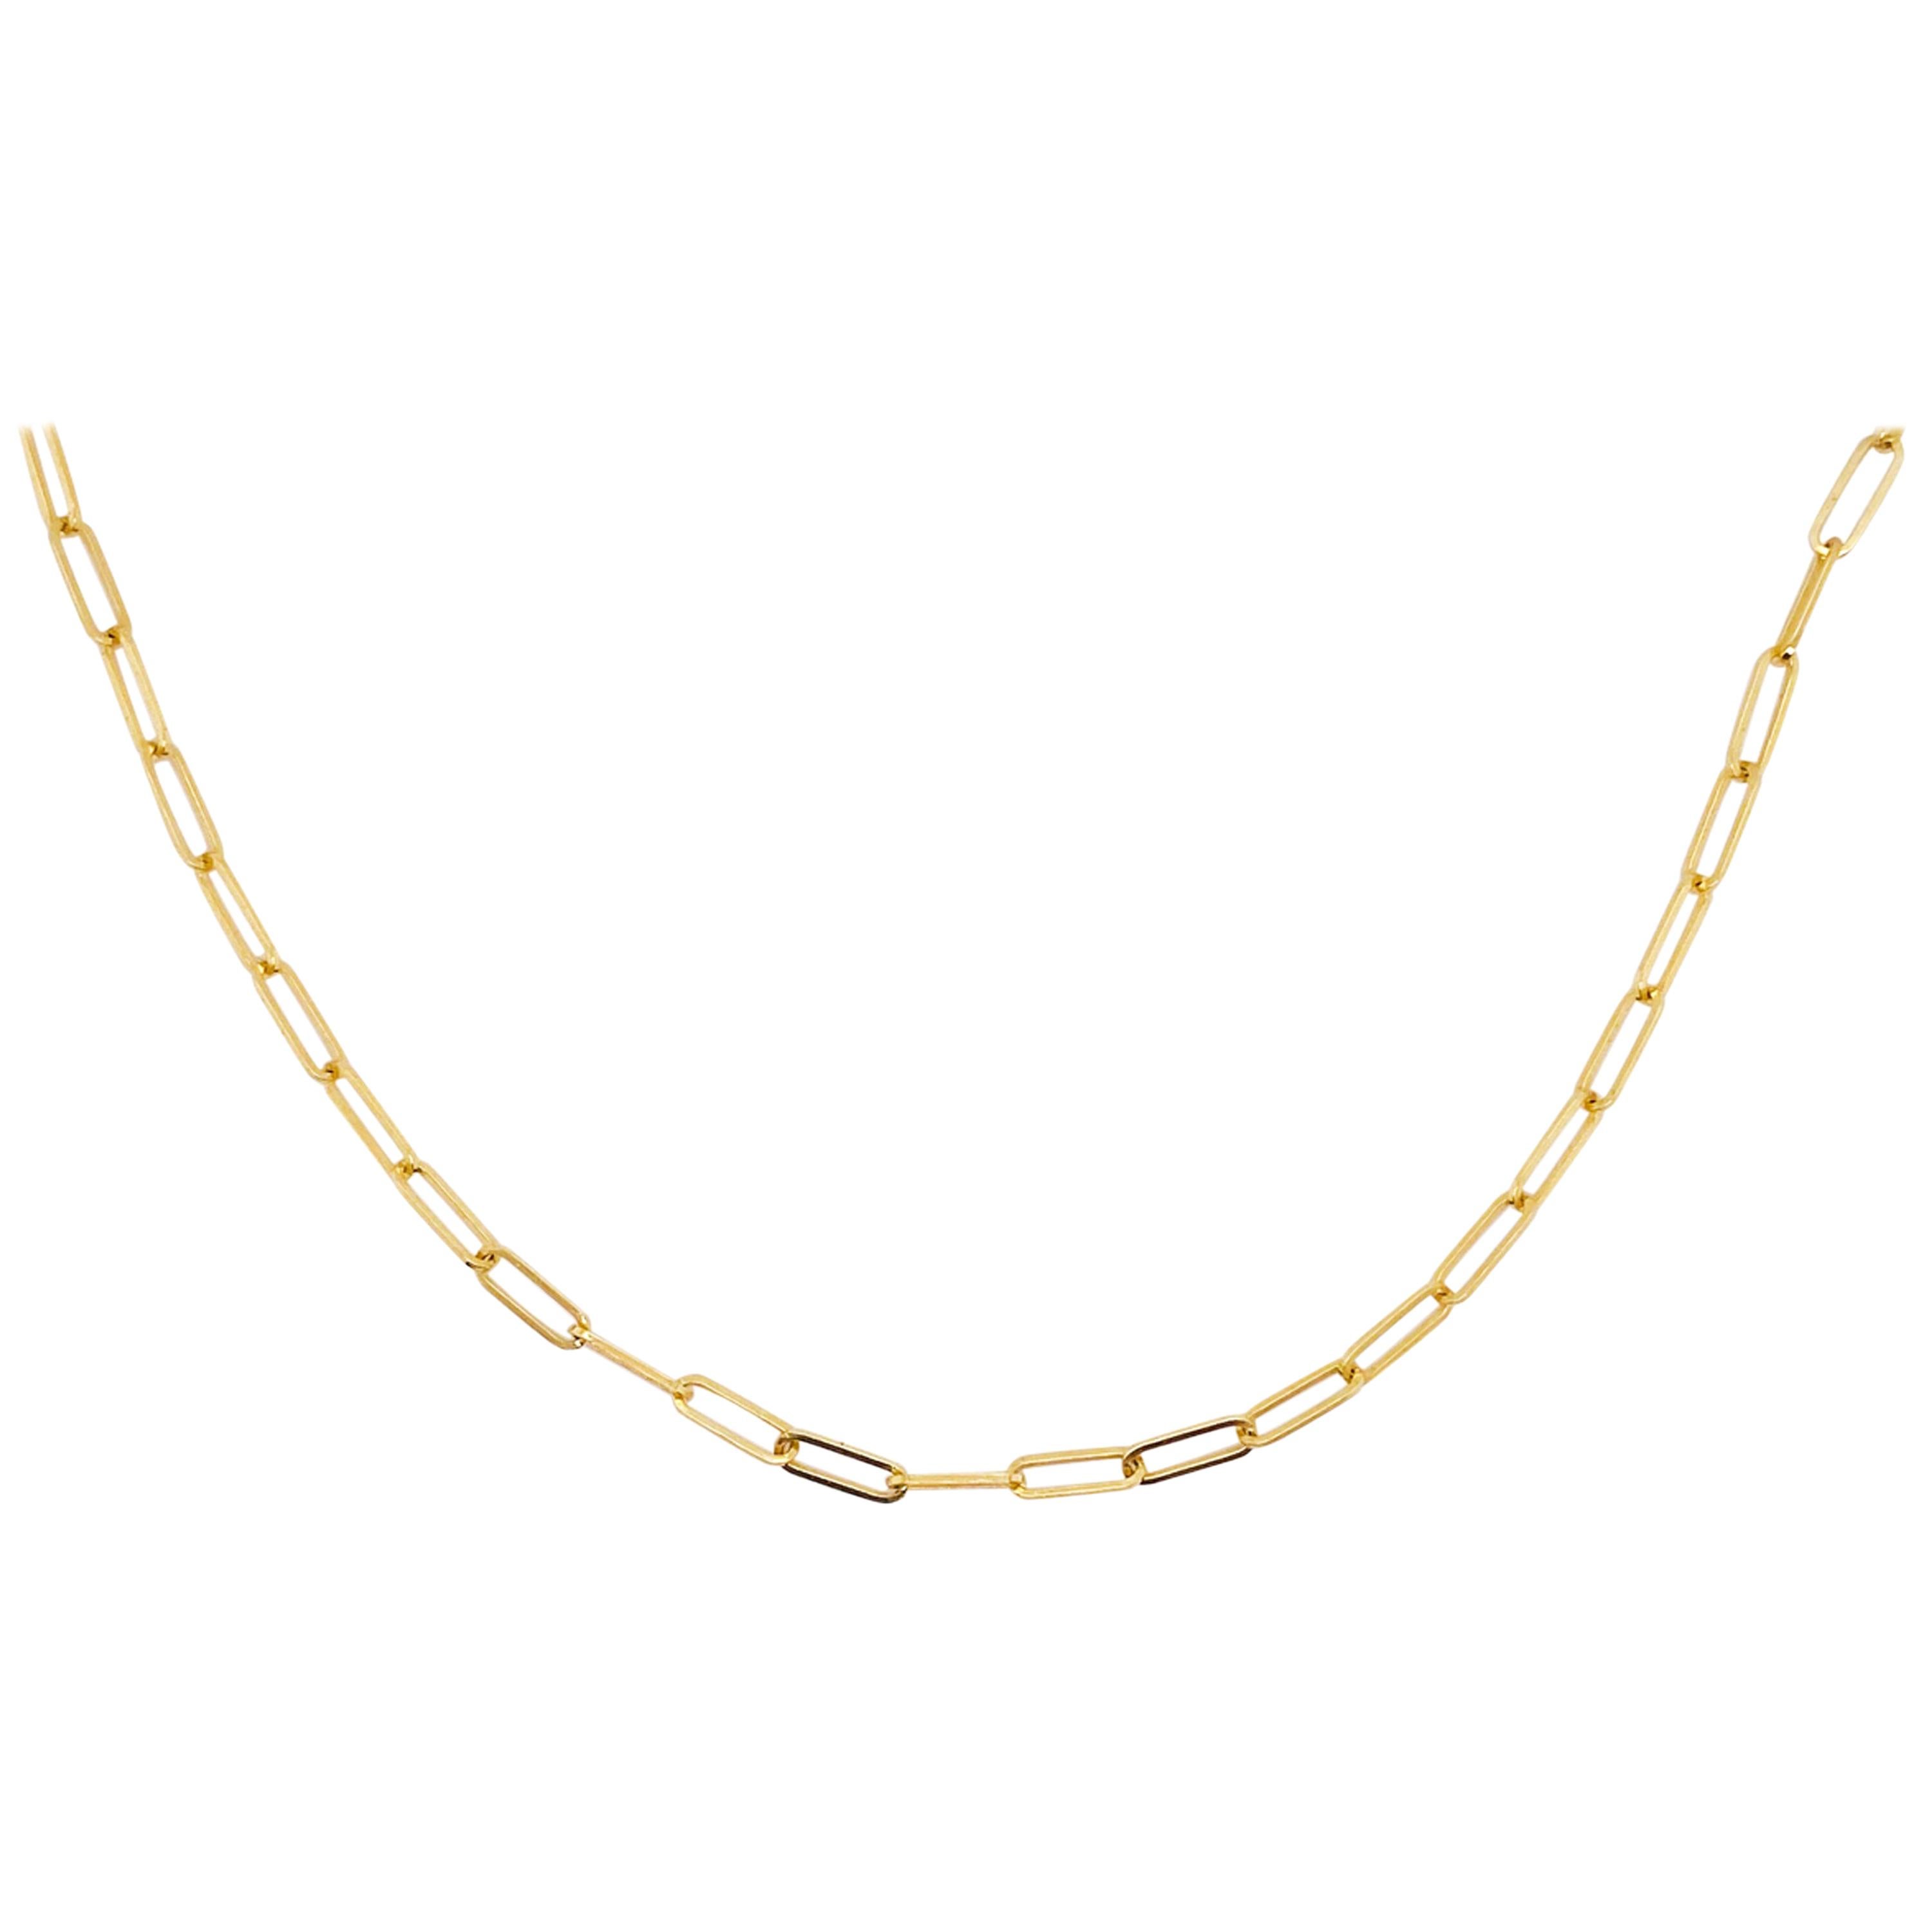 Paper Clip Chain Necklace, 18 inch 2.5mm in 14K Yellow, White, Rose Gold For Sale